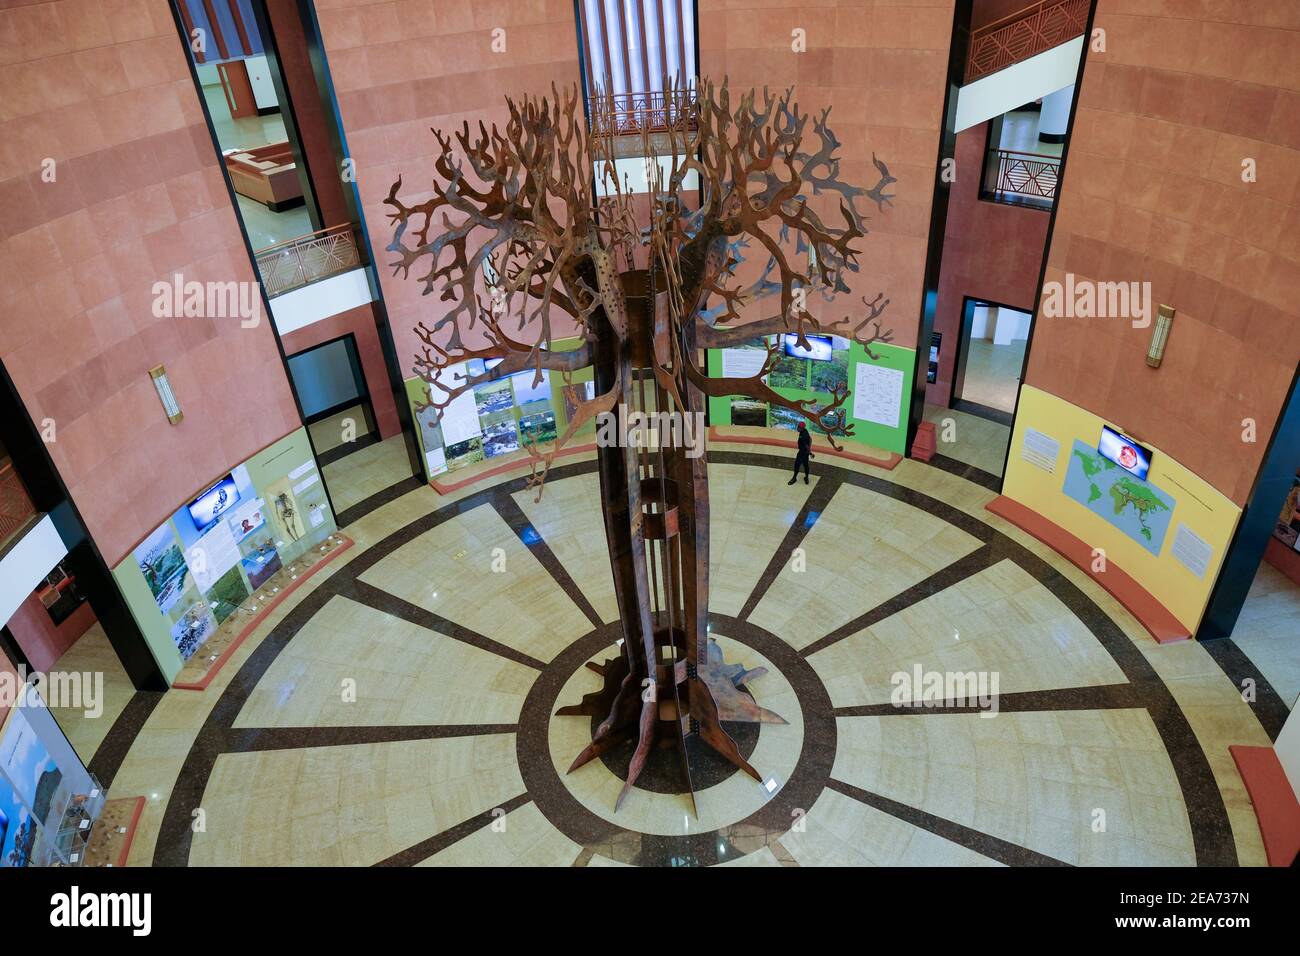 Sculpture in the Museum of Black Civilisations (Musée des civilisations noires) in Dakar, Senegal, which opened in 2018 Stock Photo